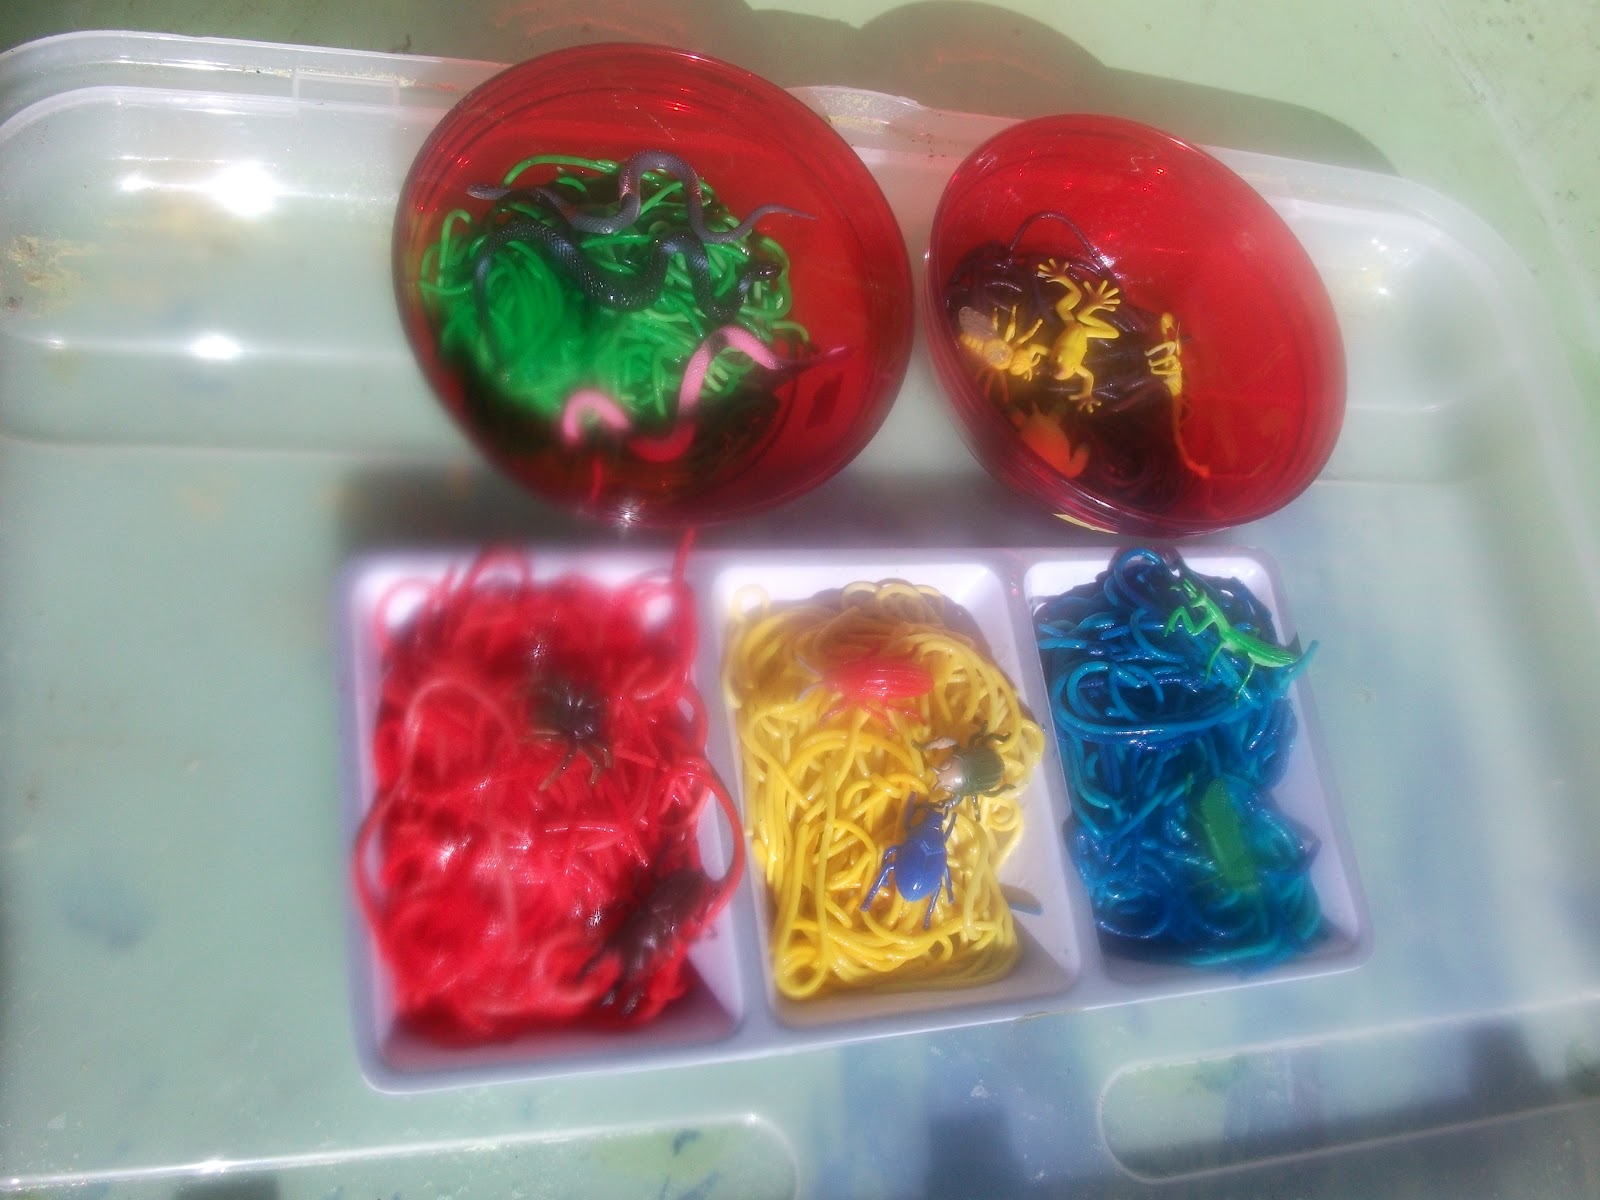 Adventures at home with Mum: Rainbow Spaghetti & Bug Cooking